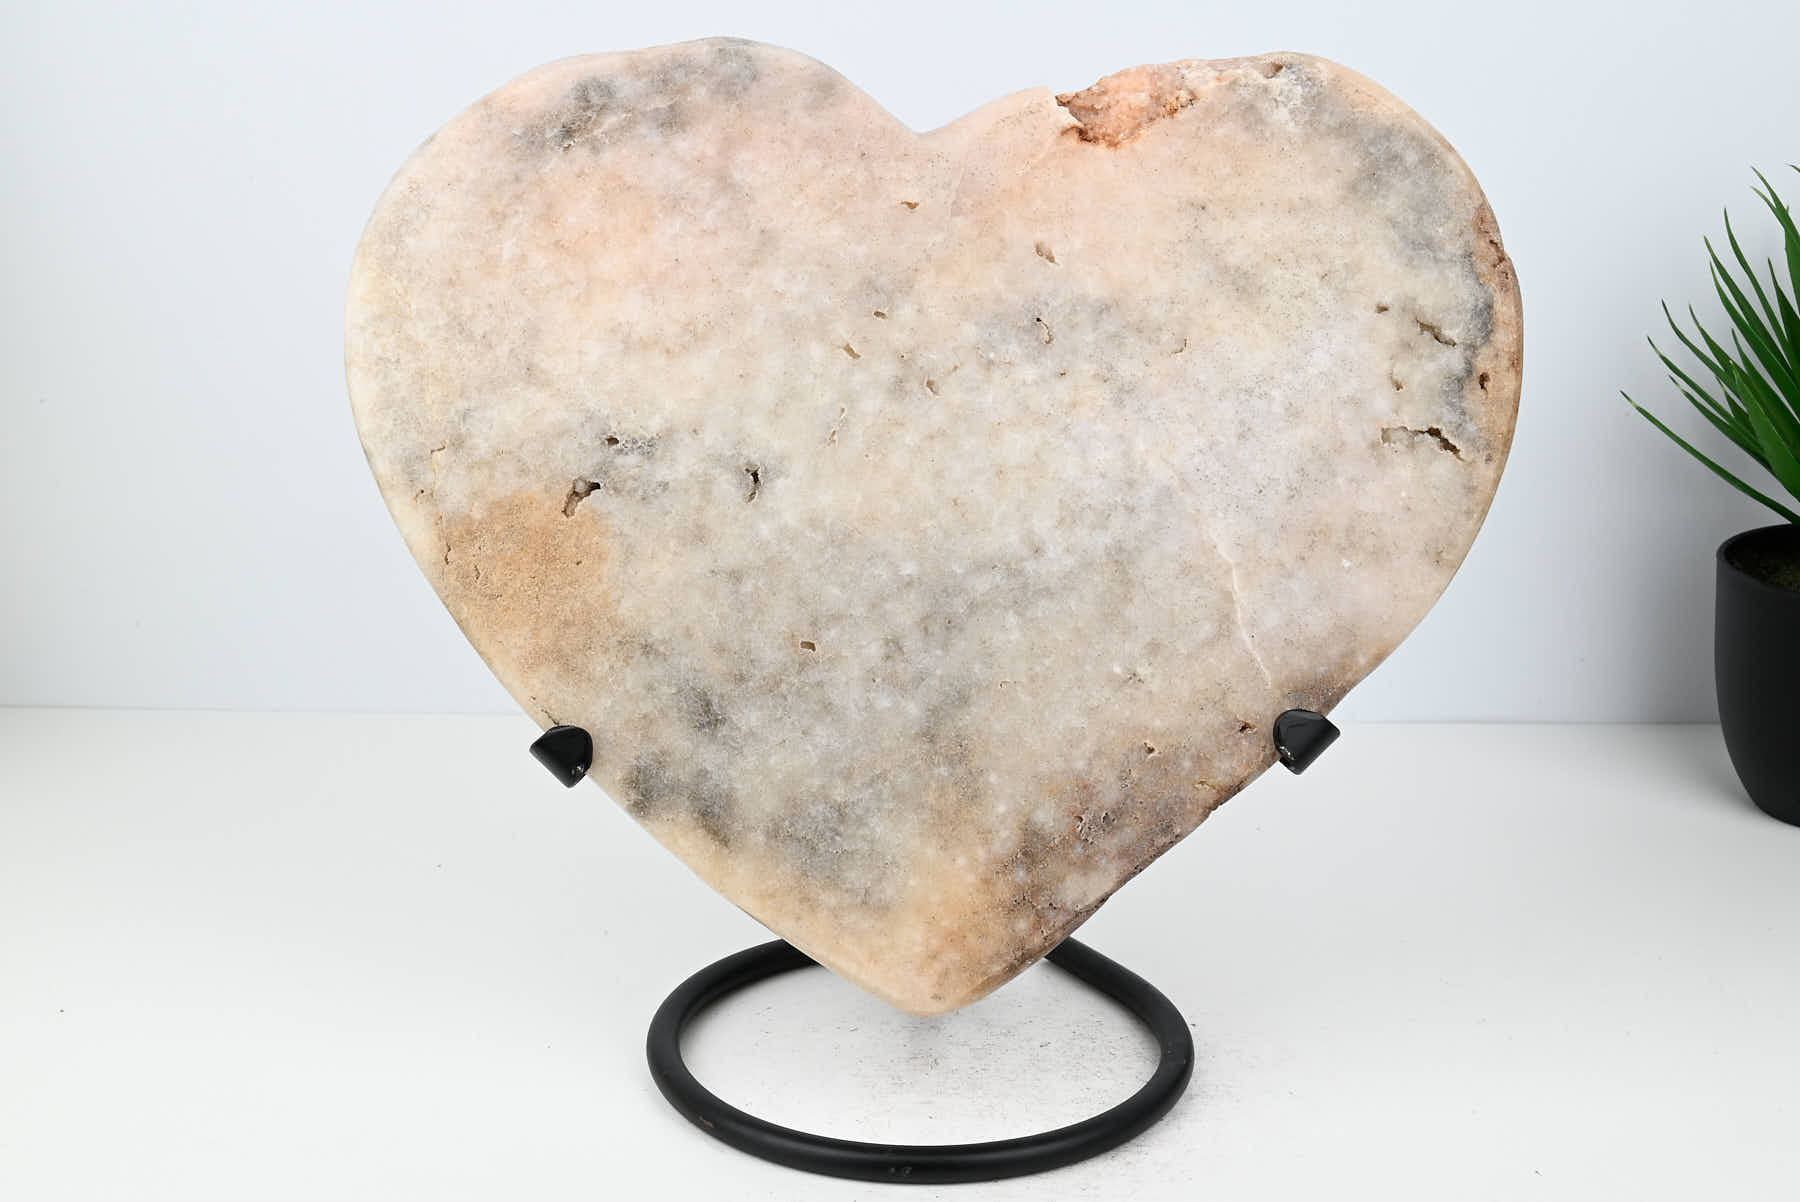 Extra Quality Pink Amethyst Heart - 4.74kg, 27cm high - #HTPINK-34021